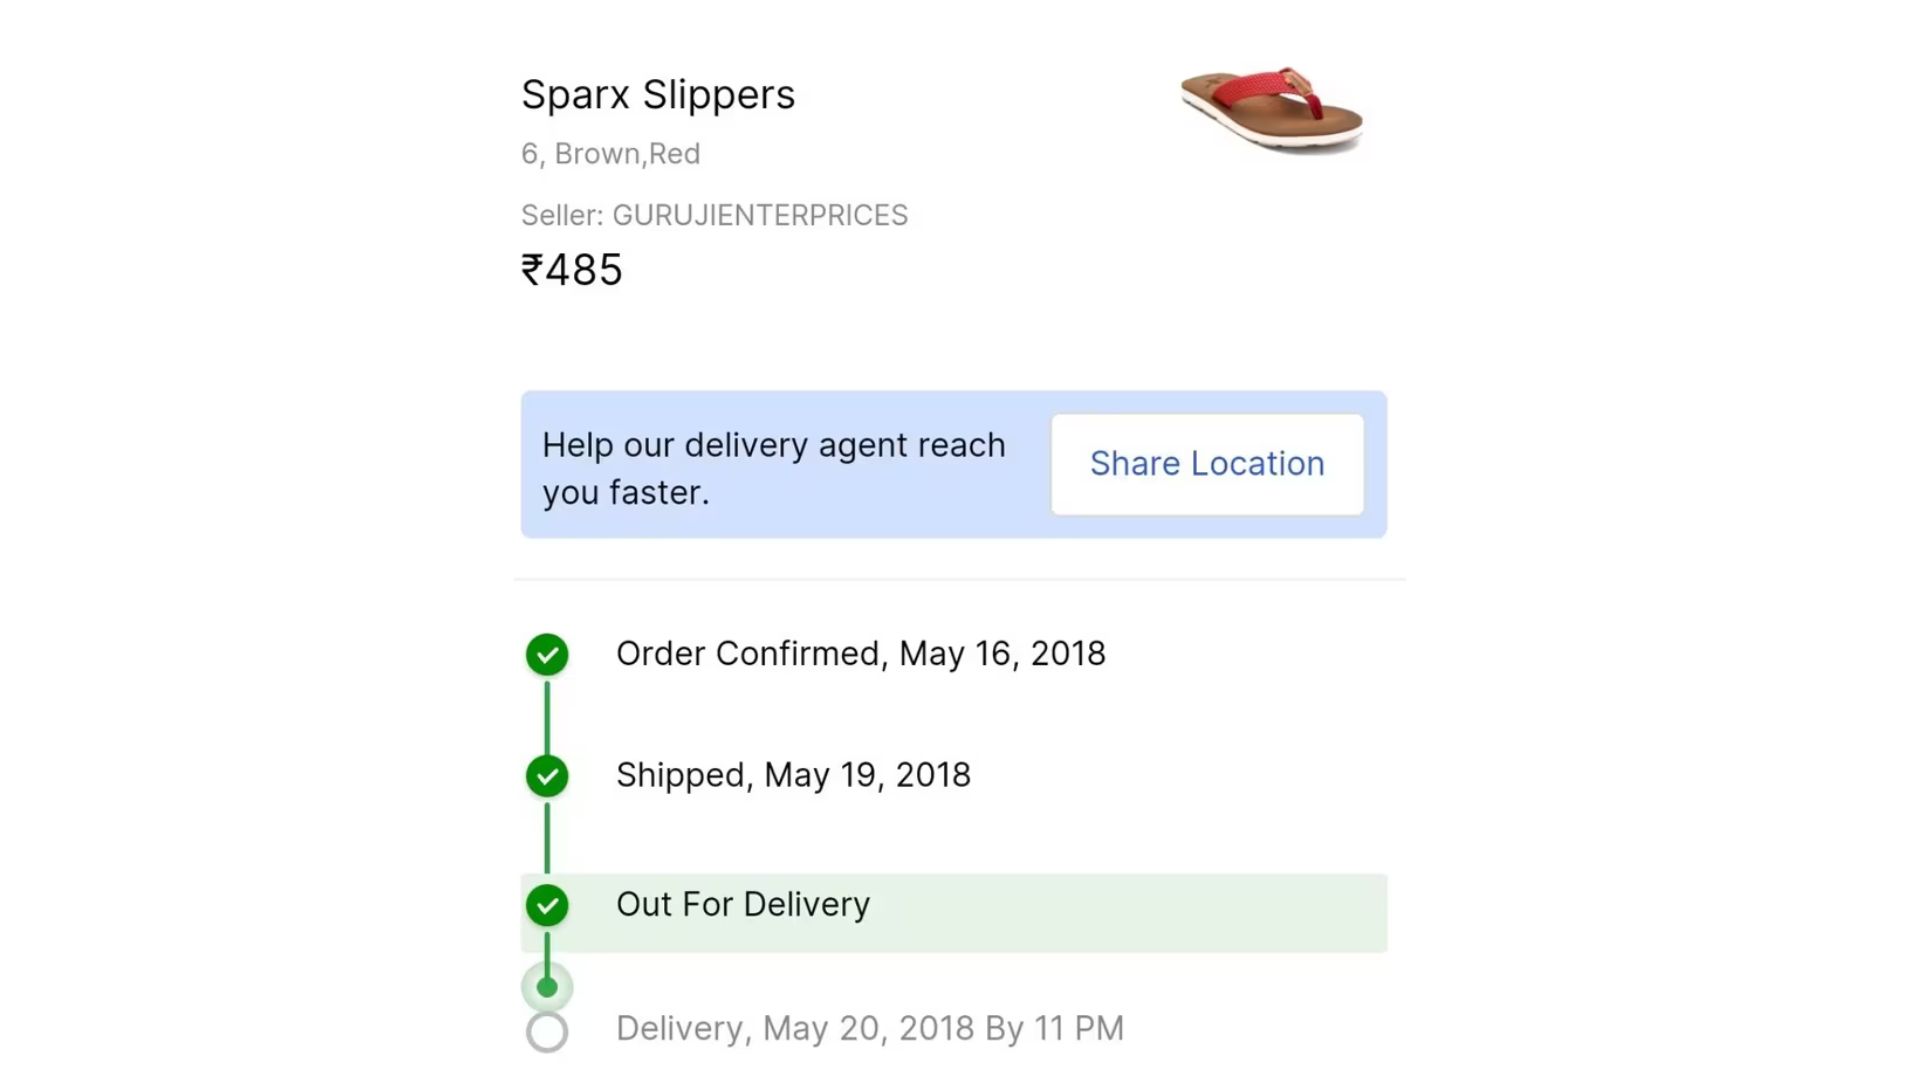 Flipkart Contacts Mumbai Customer After 6 Years For Undelivered Order